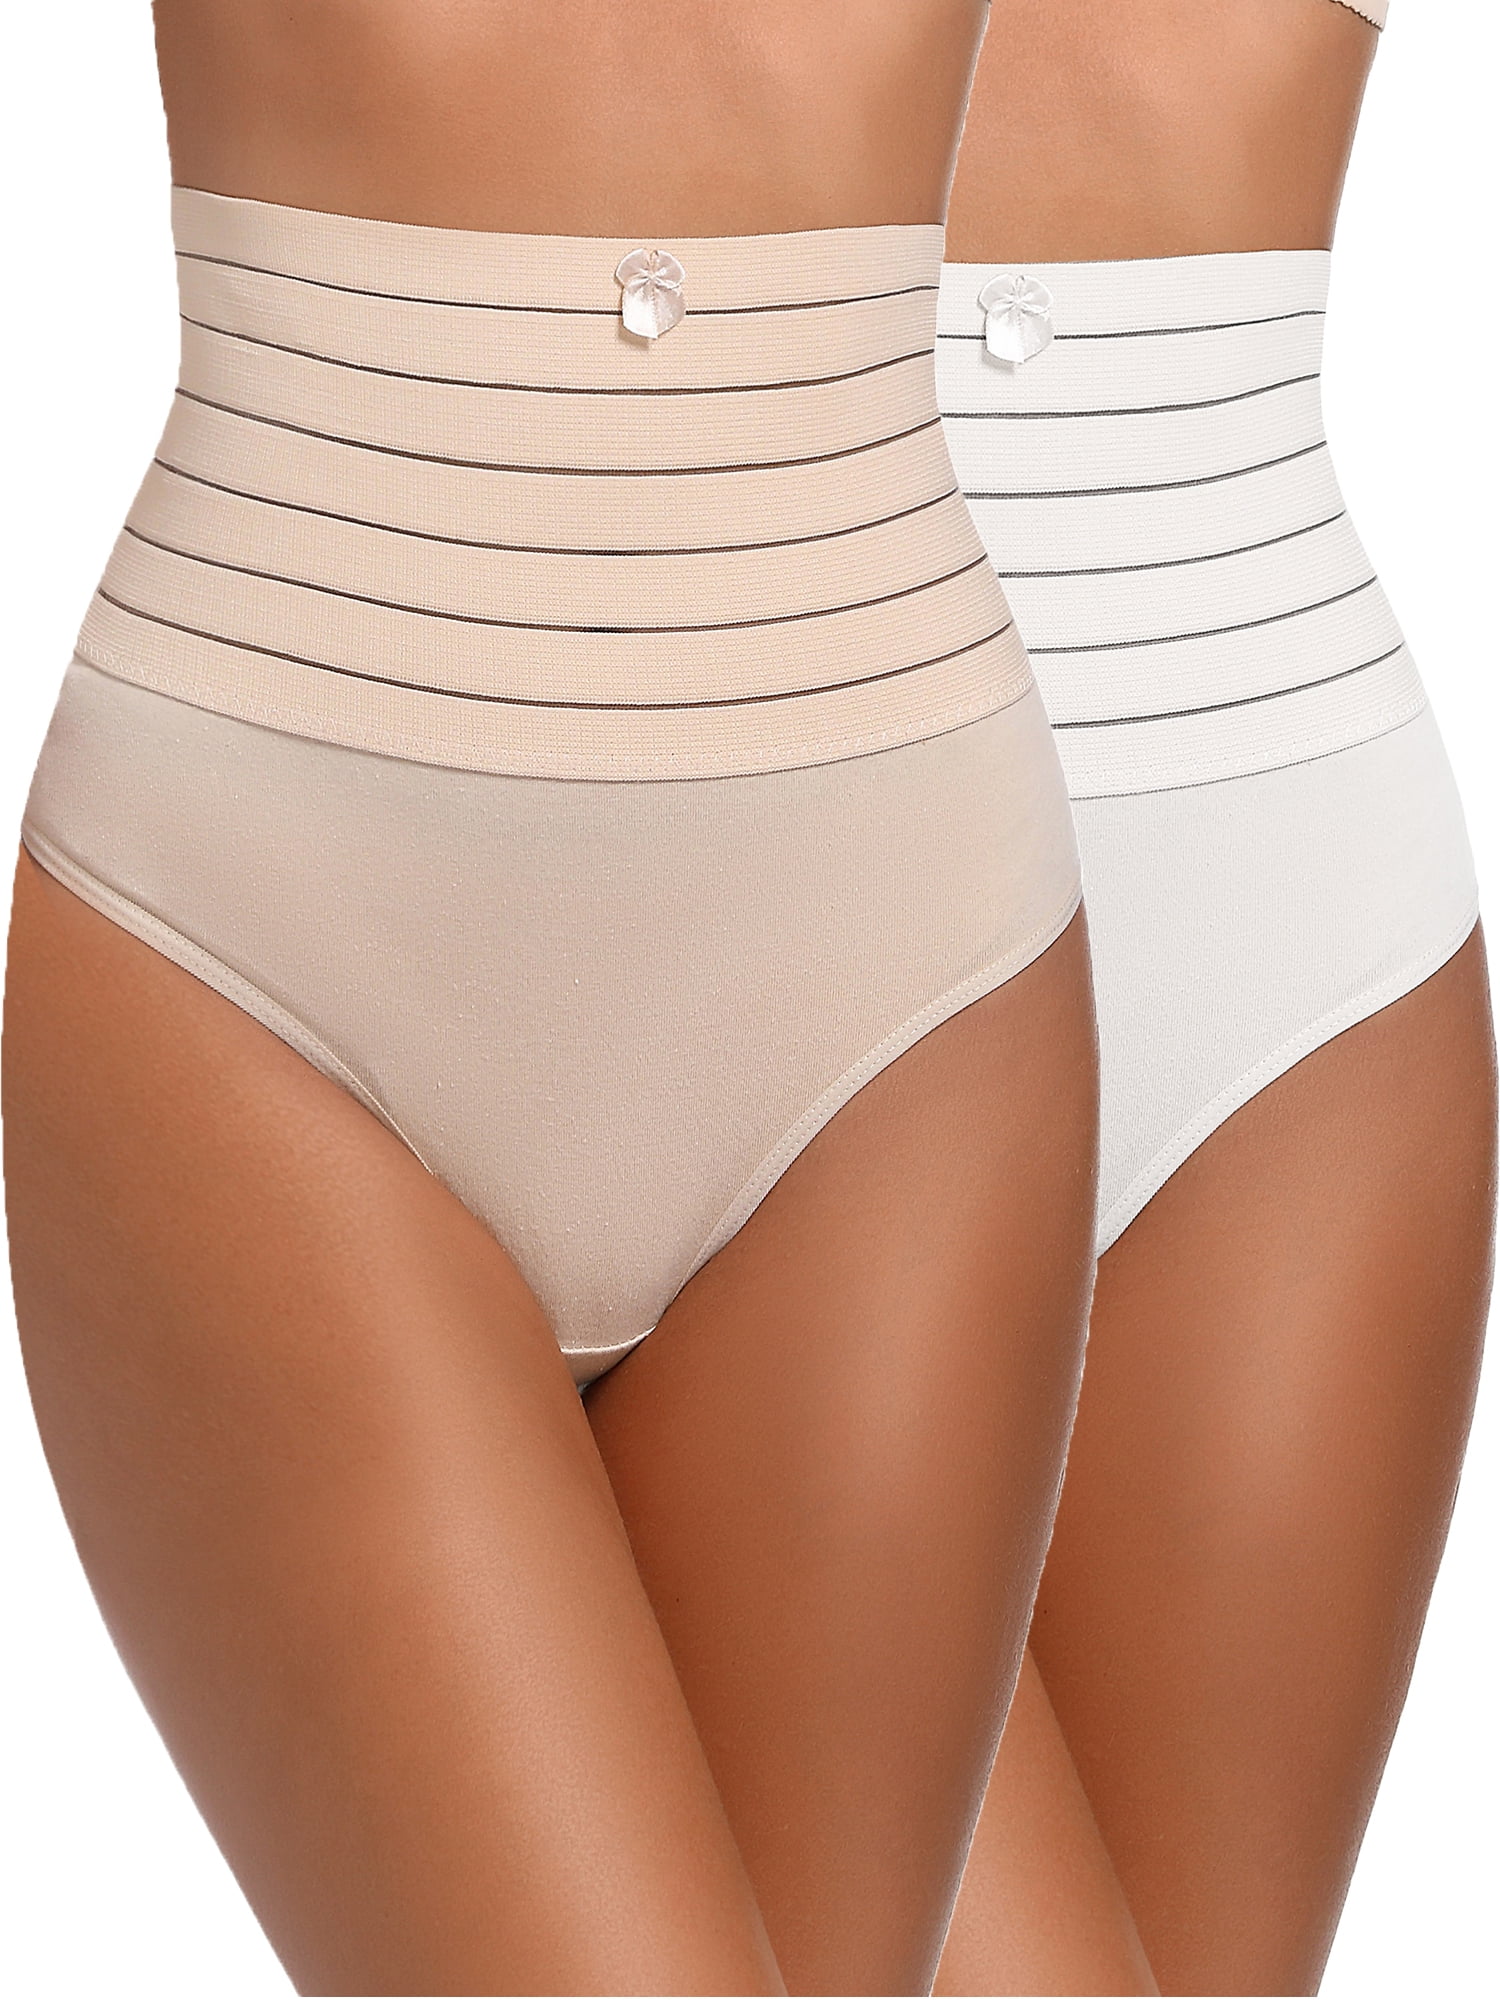 2 Pack Seamless Thong Shapewear for Women Tummy Control Body